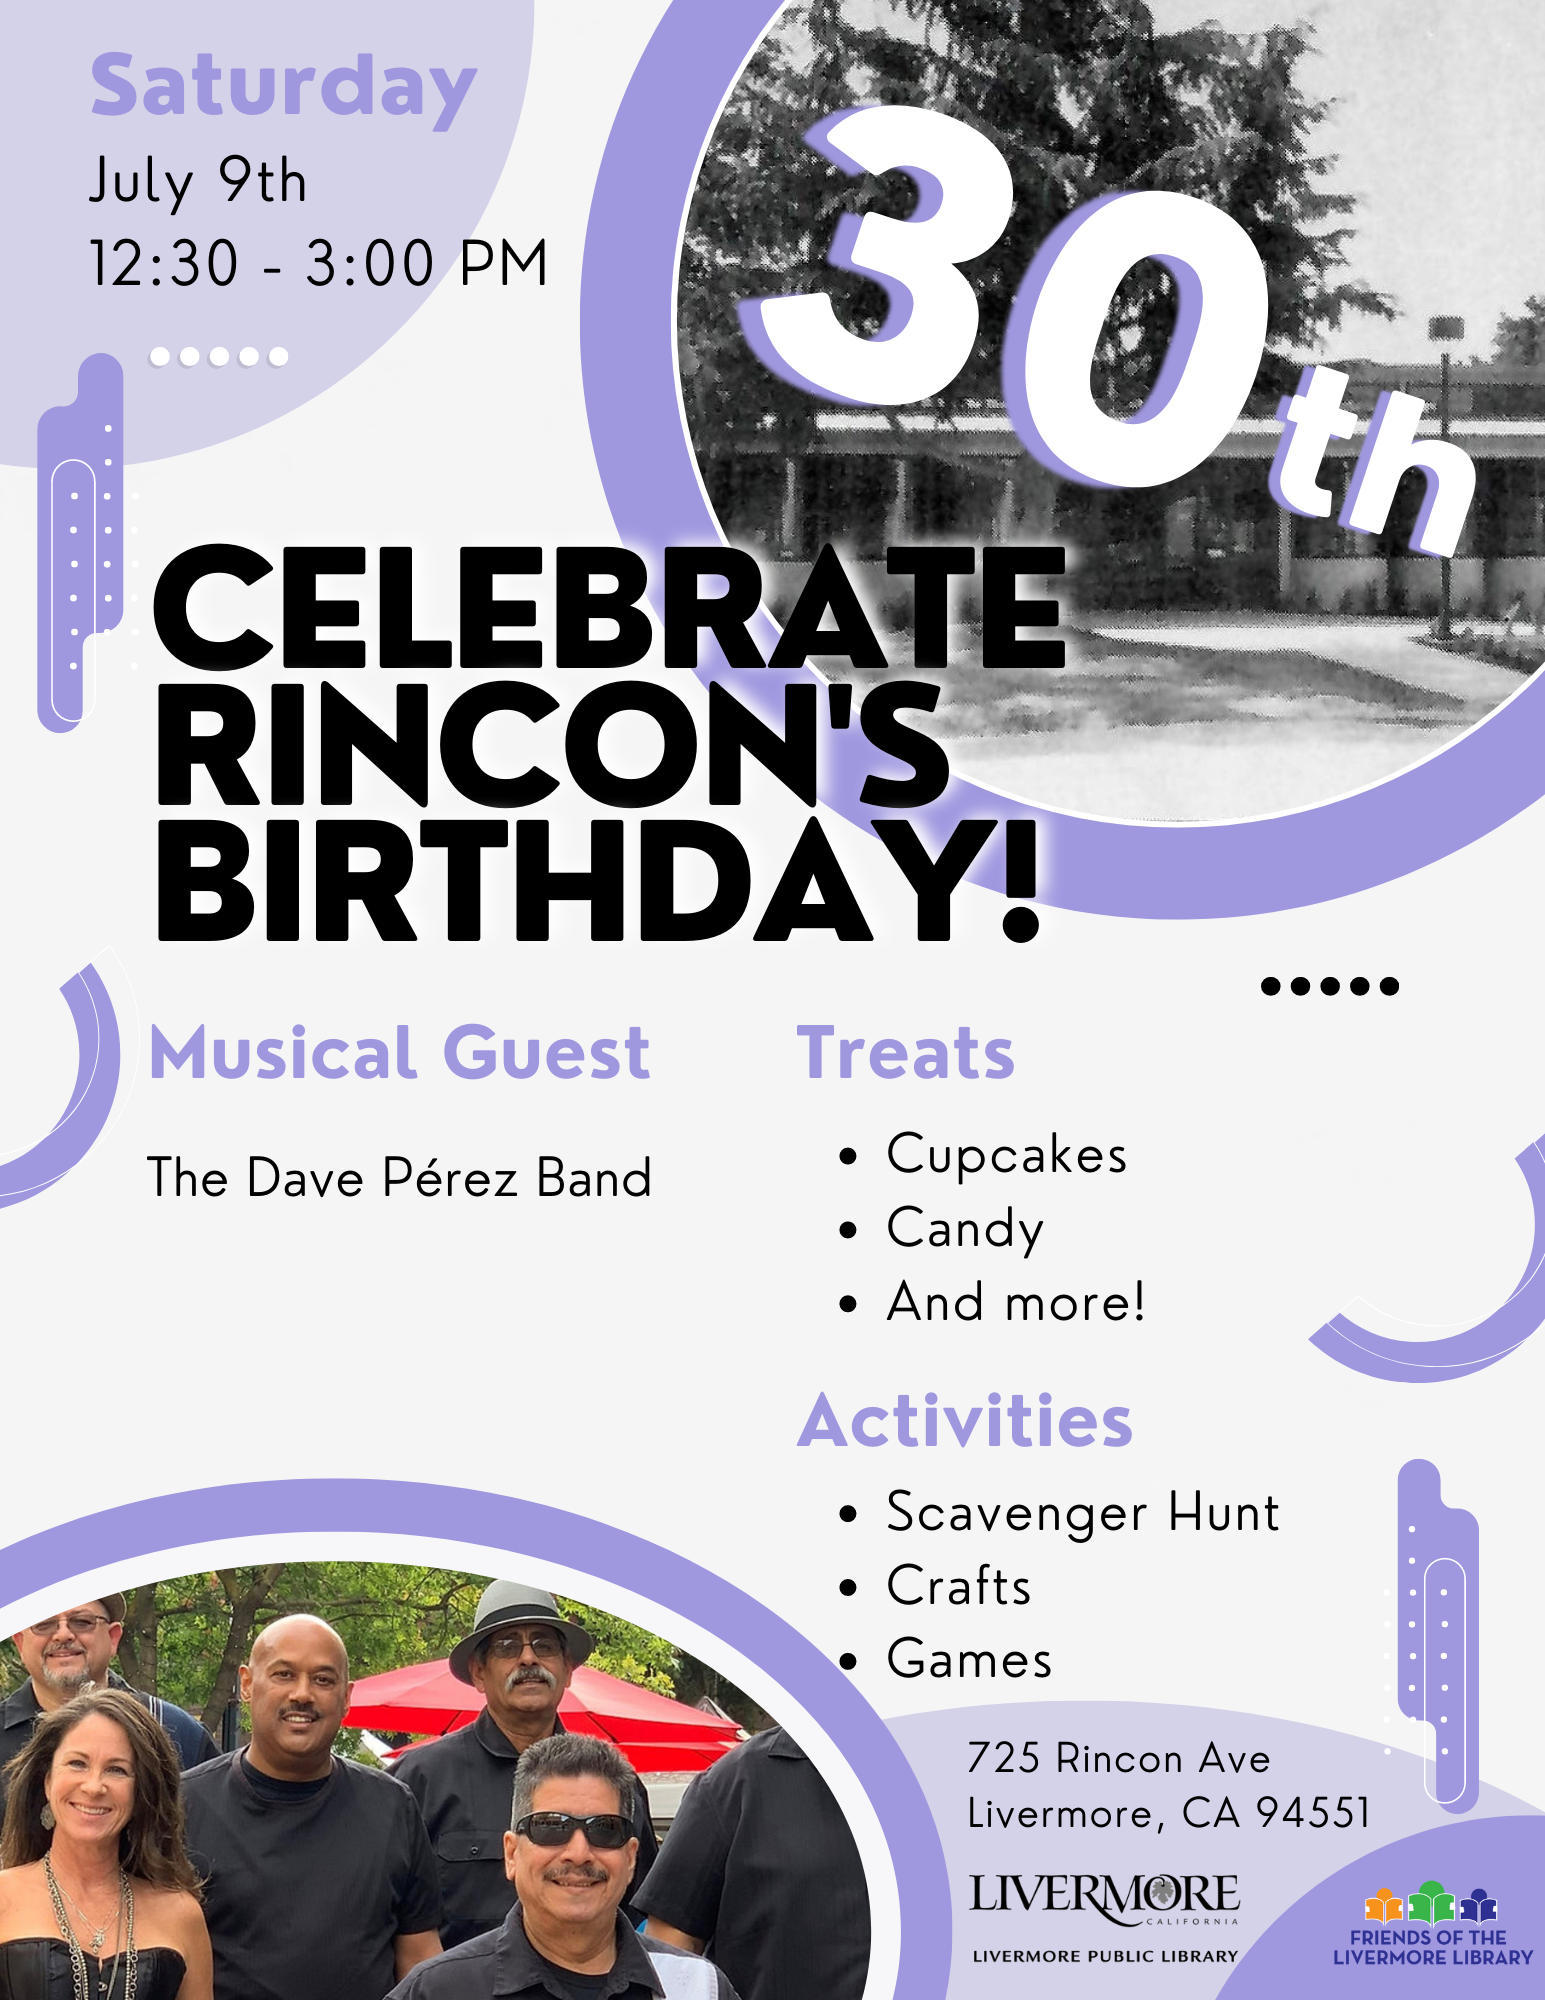 Event Flyer in Spanish for Rincon's 30th Birthday Event on July 9